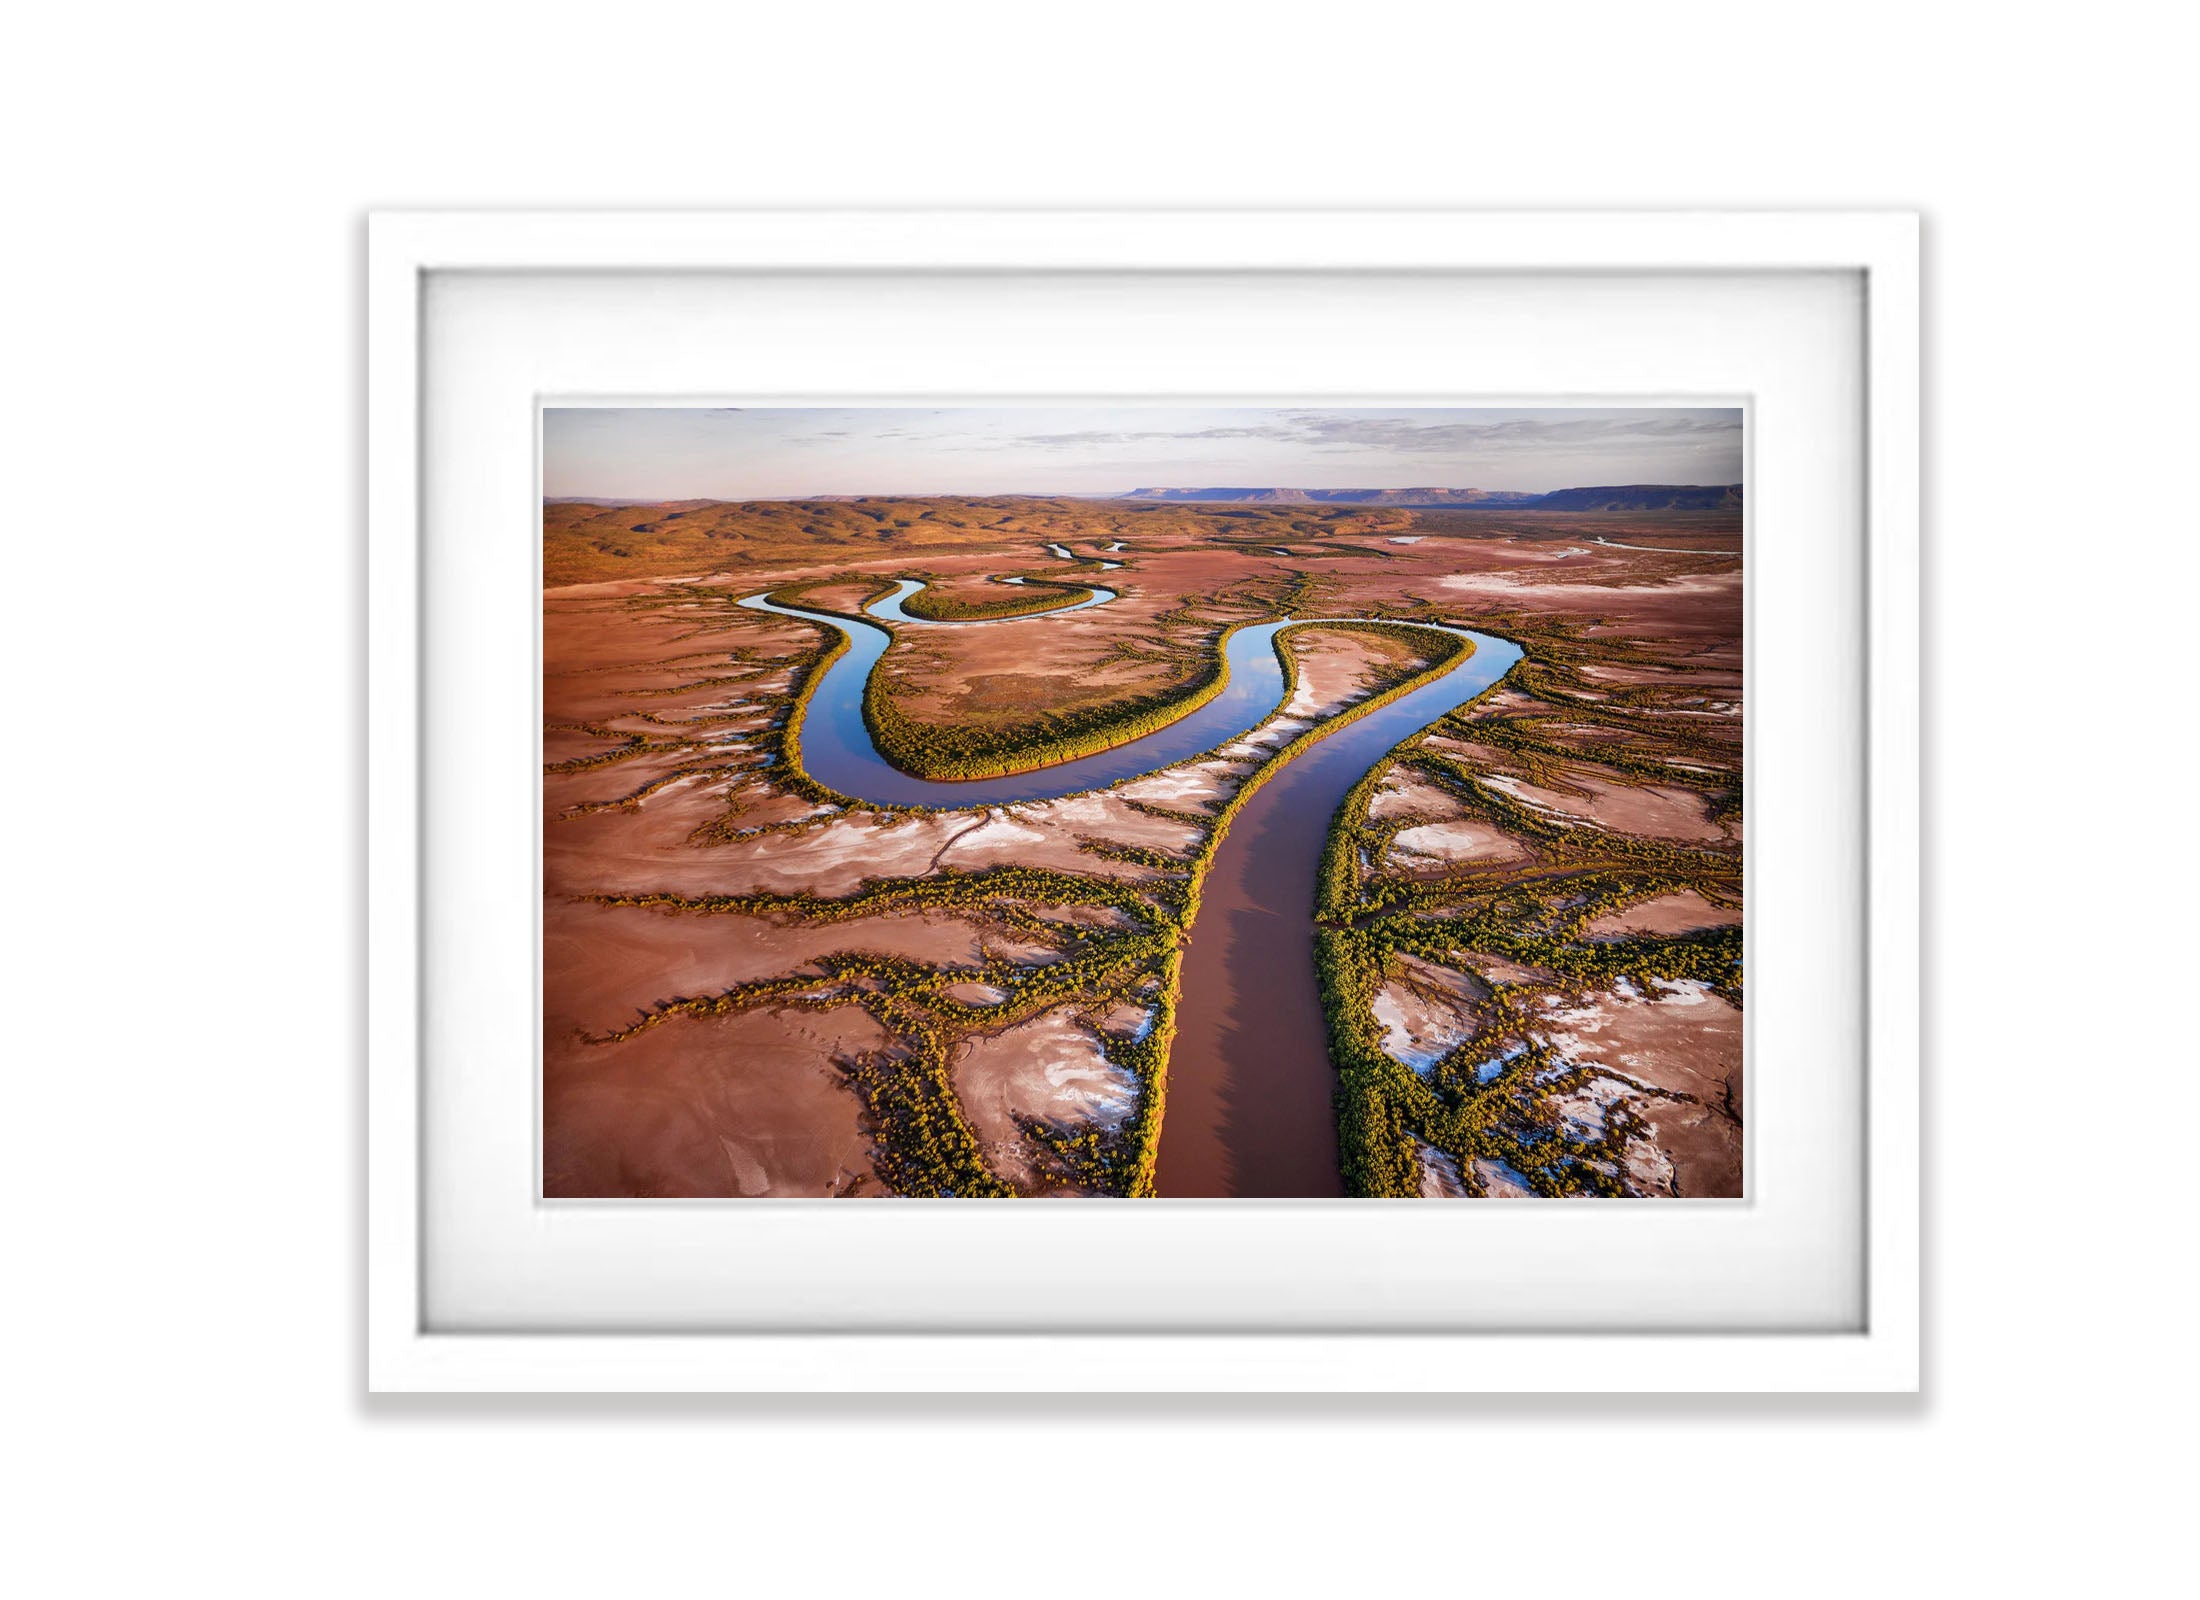 King River from the air, Wyndham, The Kimberley